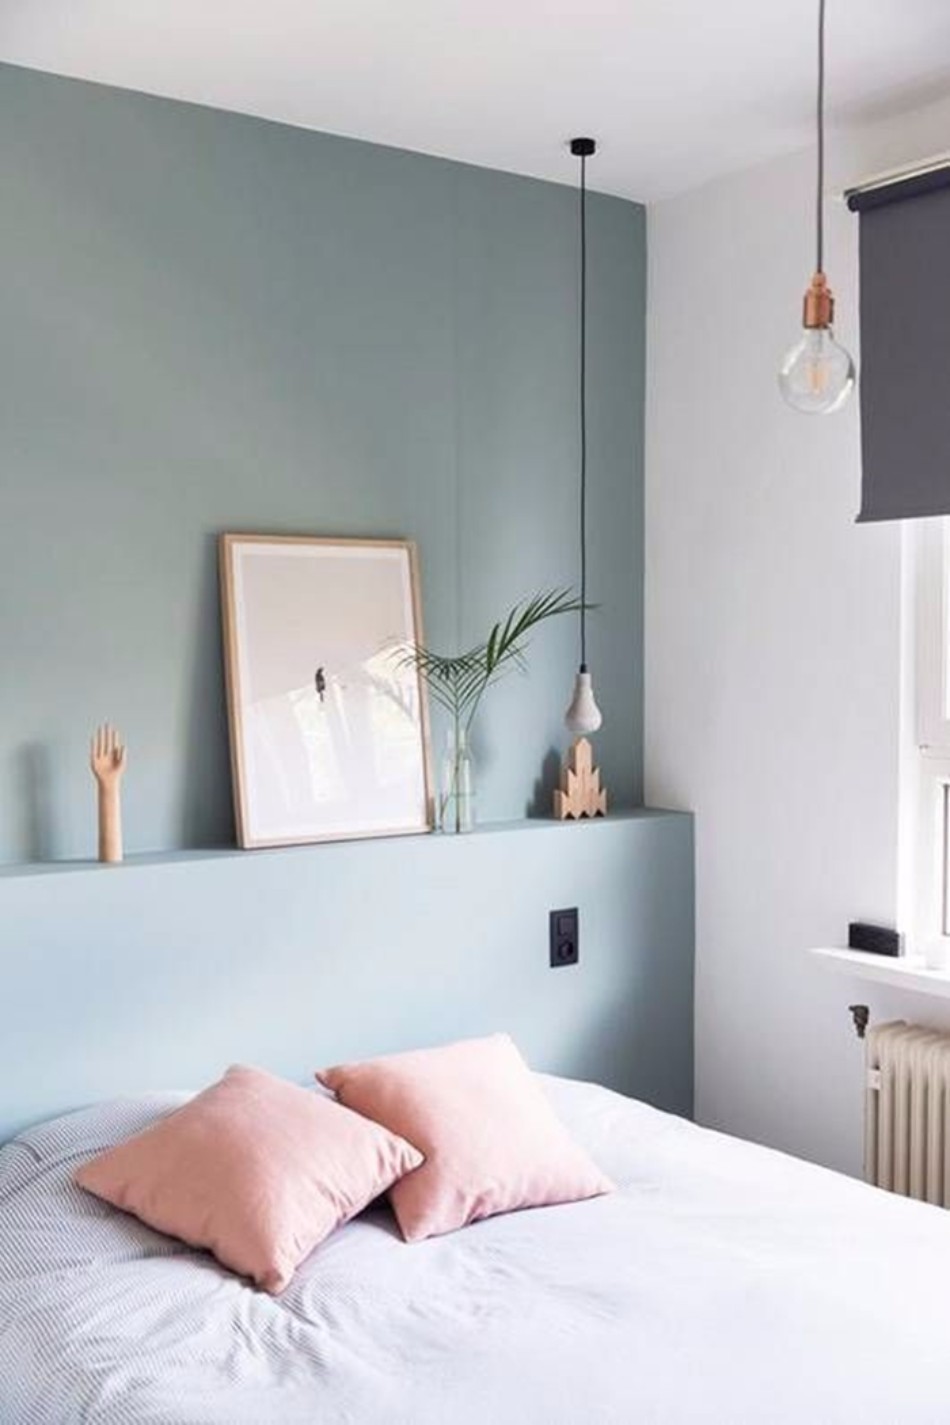 10 Ideas To Prove Bedside Tables Don’t Have To Be Nightstands | www.bocadolobo.com #bedroom #sidetable #coffeeandsidetables #roomdesign #interiordesign #creativedesign